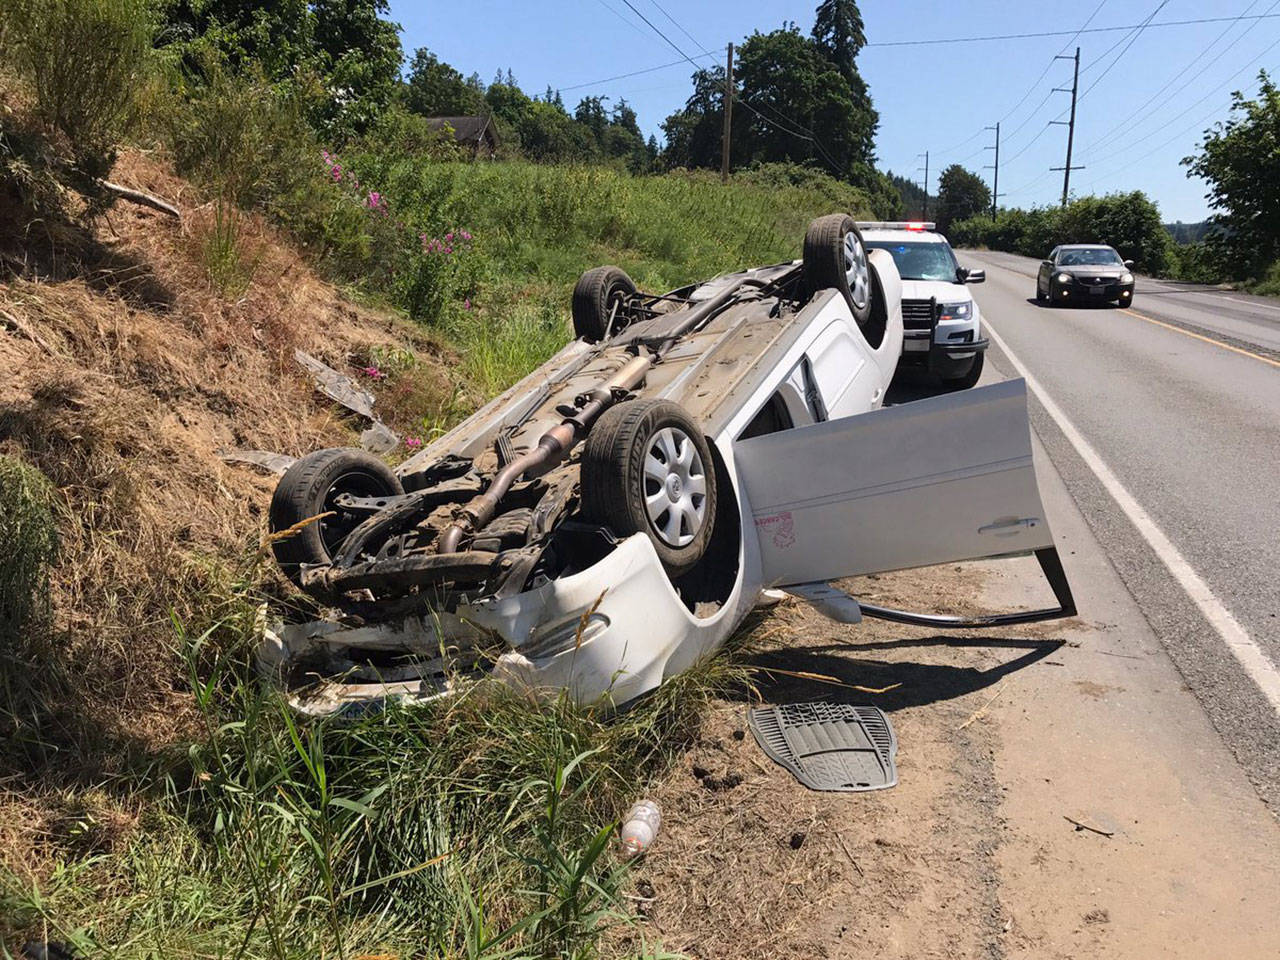 A vehicle traveling on state Highway 19 near Chimacum hit soft dirt on the side of the road and flipped Sunday afternoon. The driver and passenger were both airlifted to Harborview Medical Center. (Washington State Patrol)